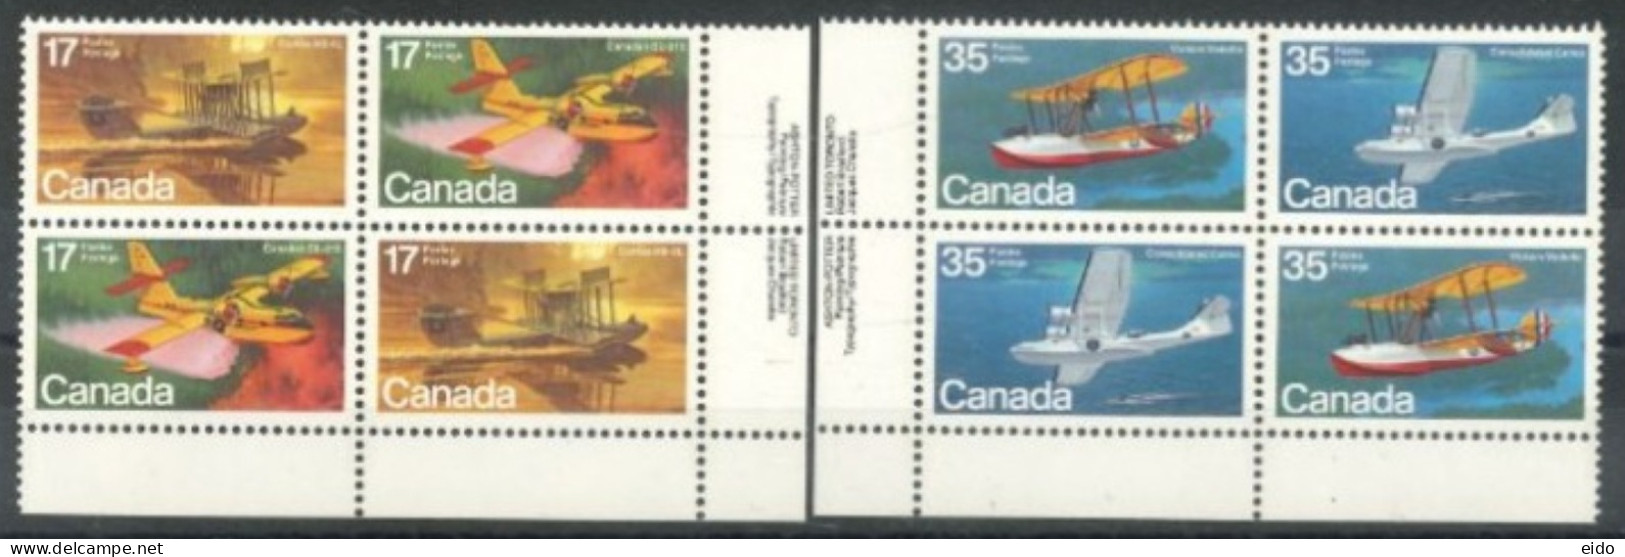 CANADA - 1979, CANADIAN AIRCRAFT (FIRST SERIES), FLYING BOATS STAMPS COMPLETE SET OF 4, 2 OF EACH, UMM (**). - Ungebraucht